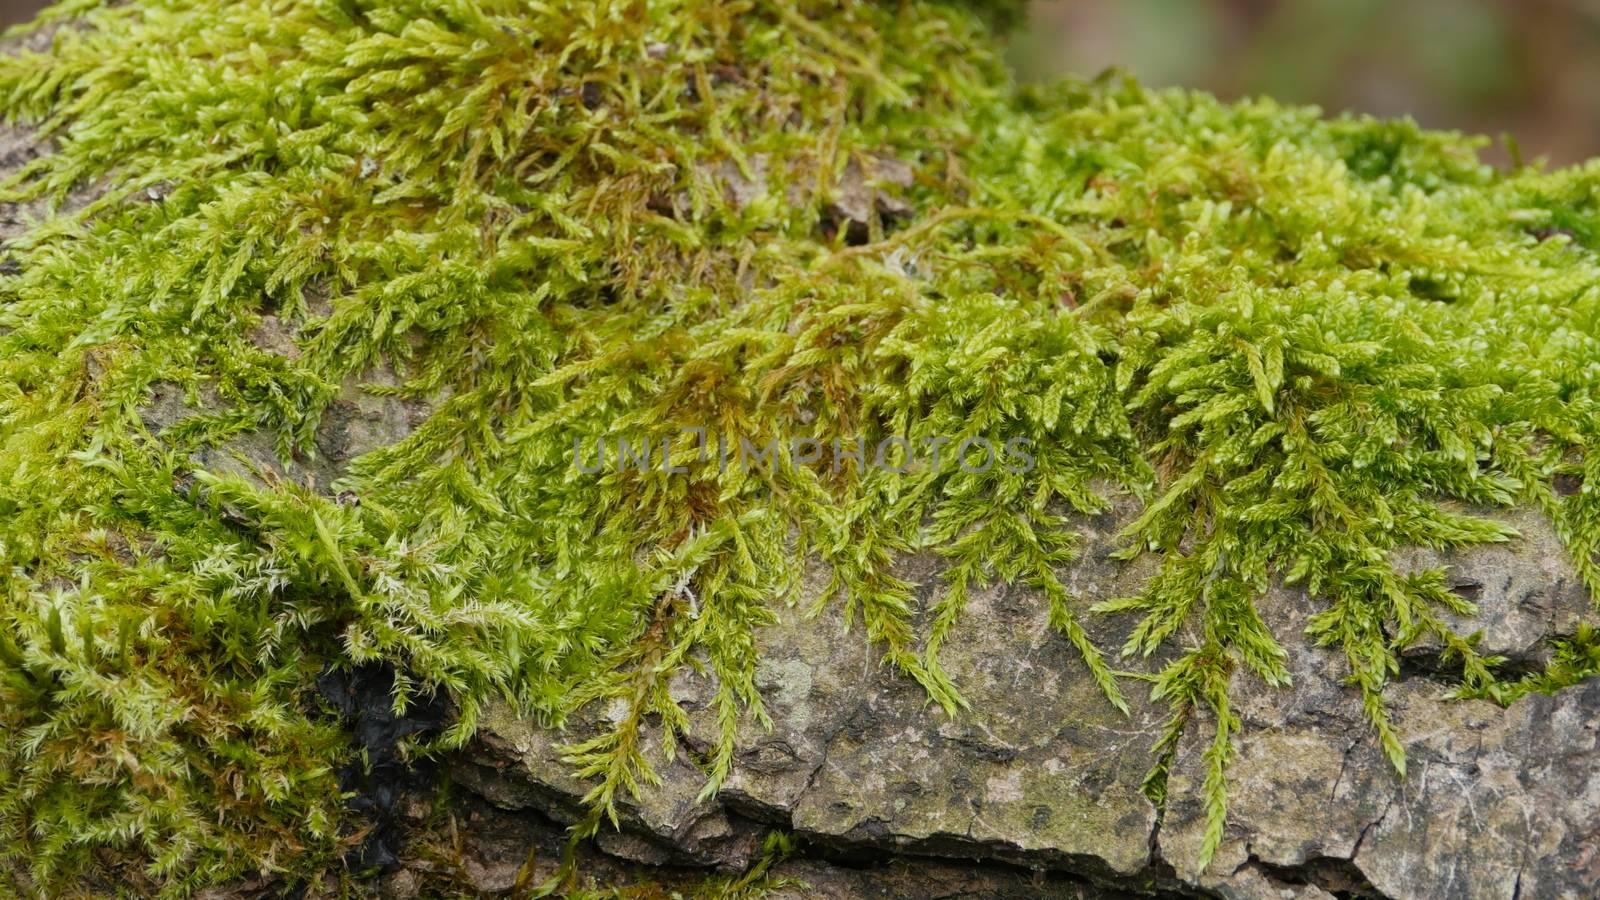 living green moss grows on the bark of an old tree